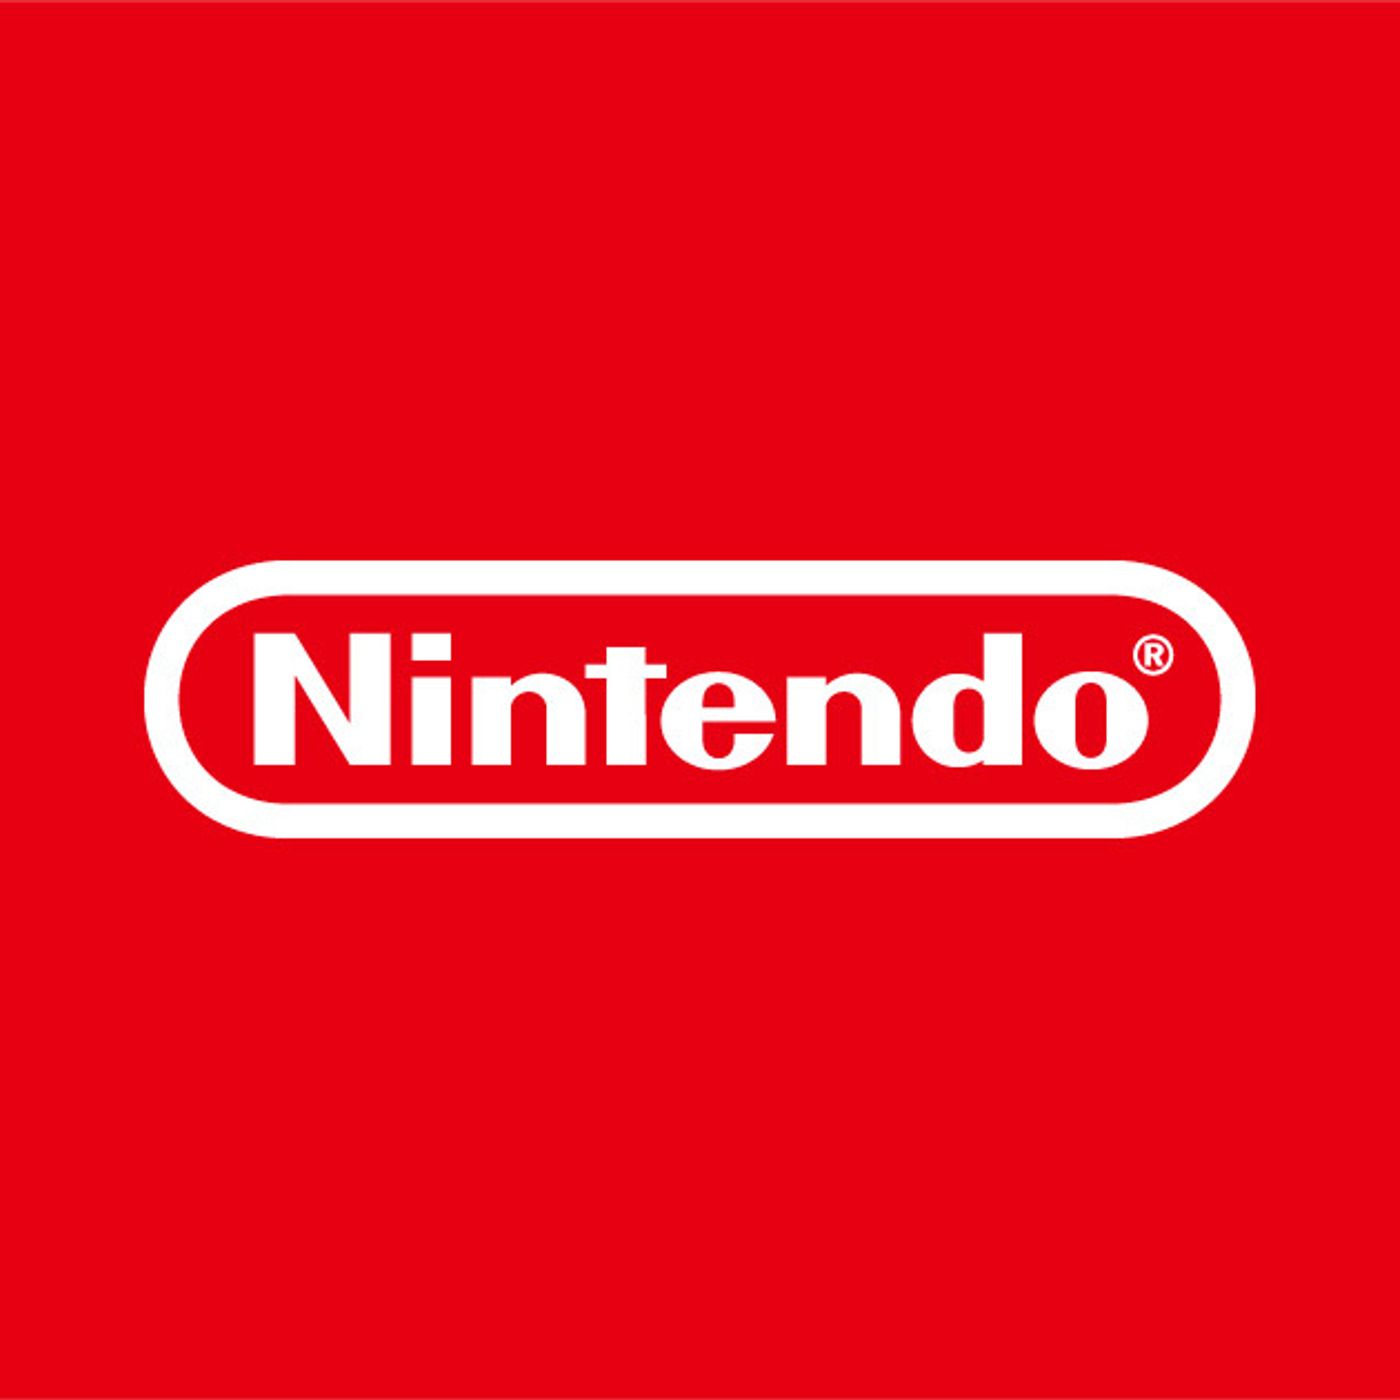 S18 Ep1293: Nintendo’s next-gen console will launch in 2024